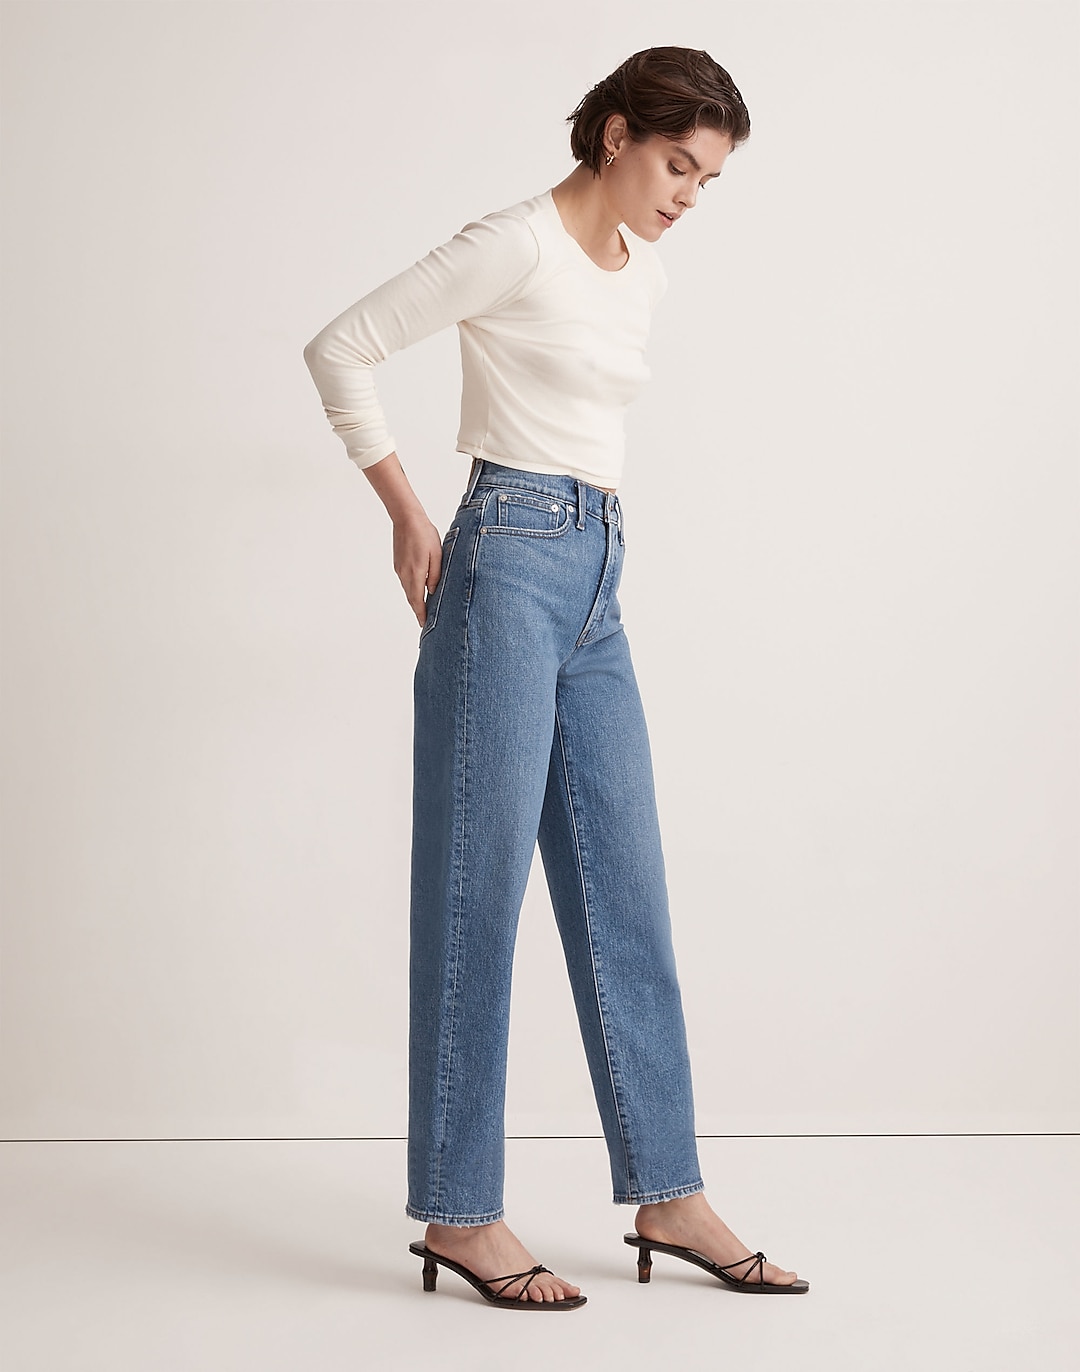 The Tall Perfect Vintage Straight Jean in Earlwood Wash